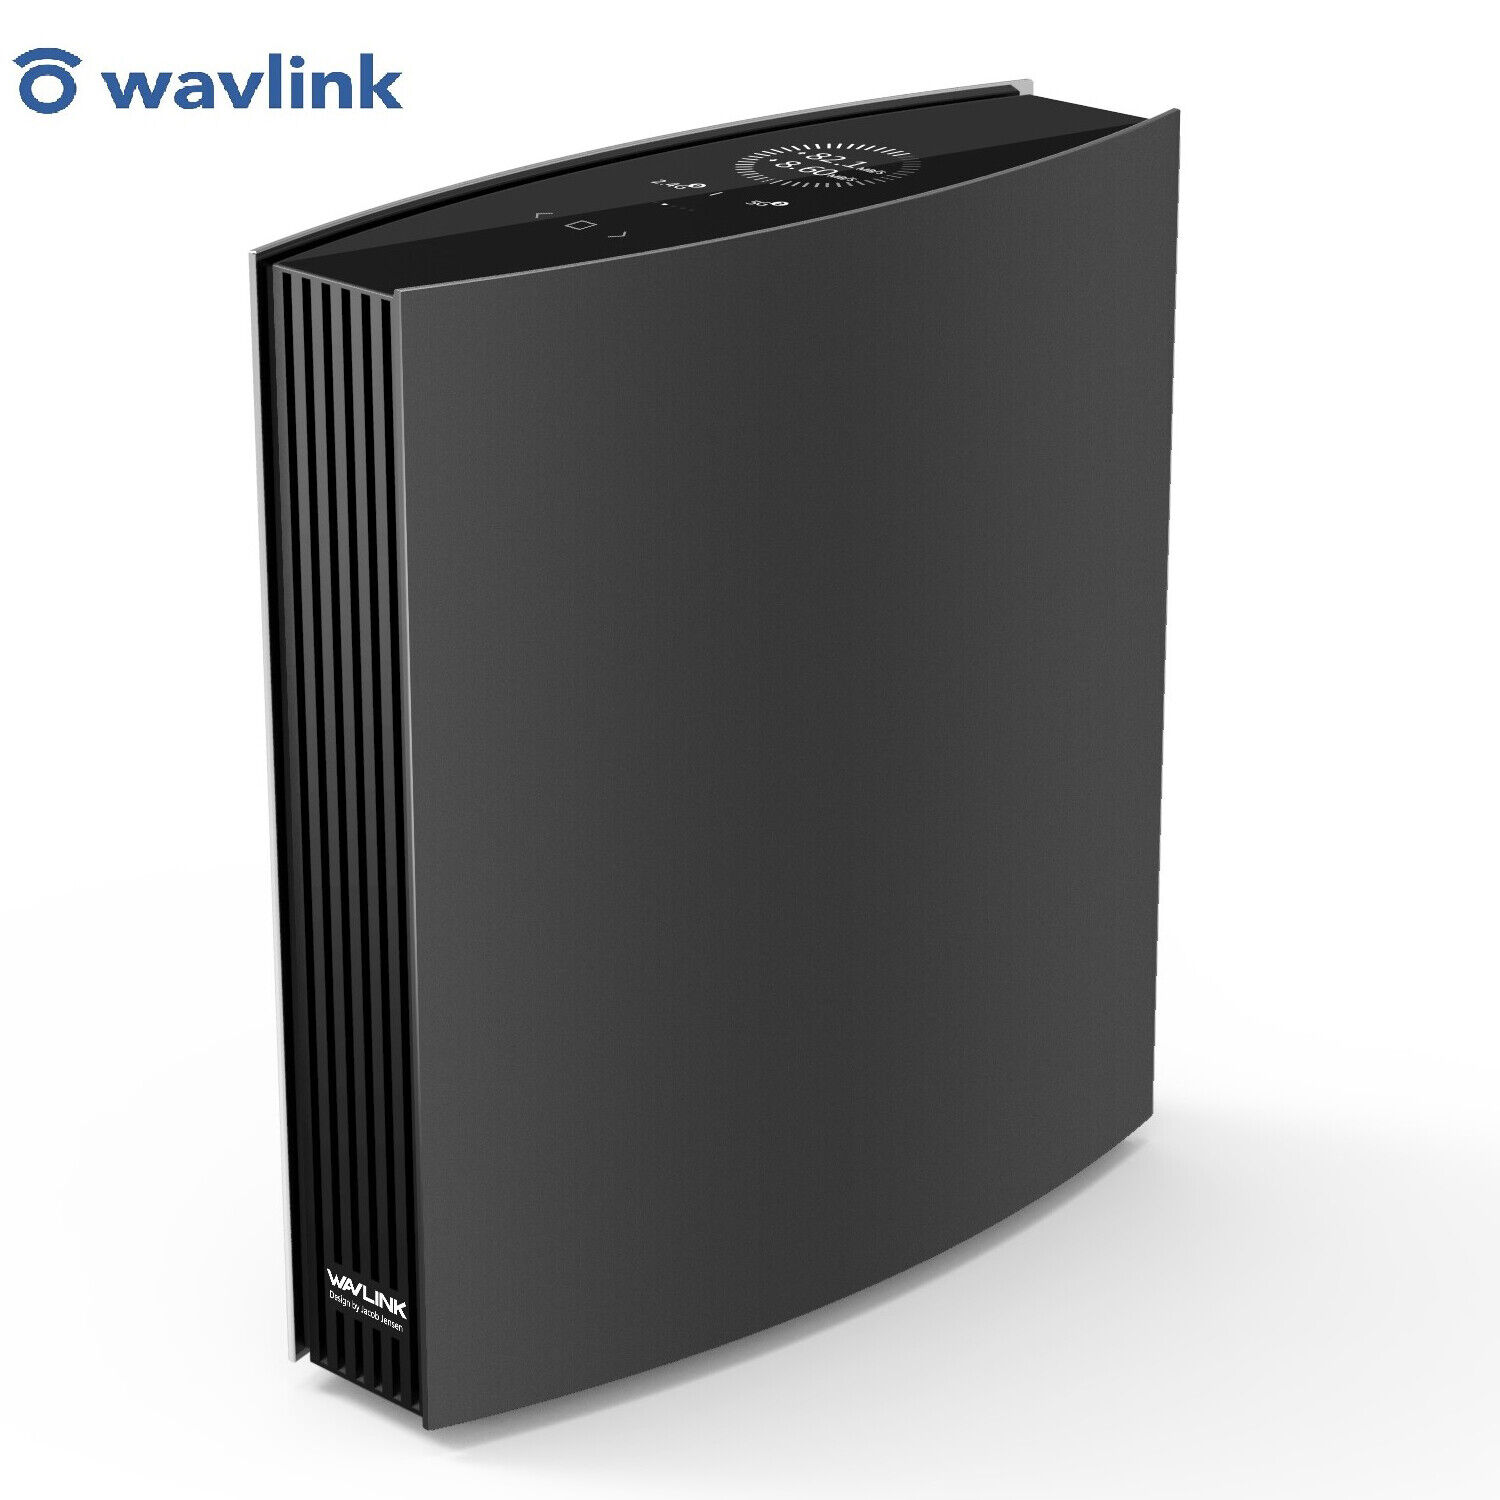 Wavlink 3200Mbps Wireless WiFi Router Dual Band 2.4g/5g WiFi Range Extender